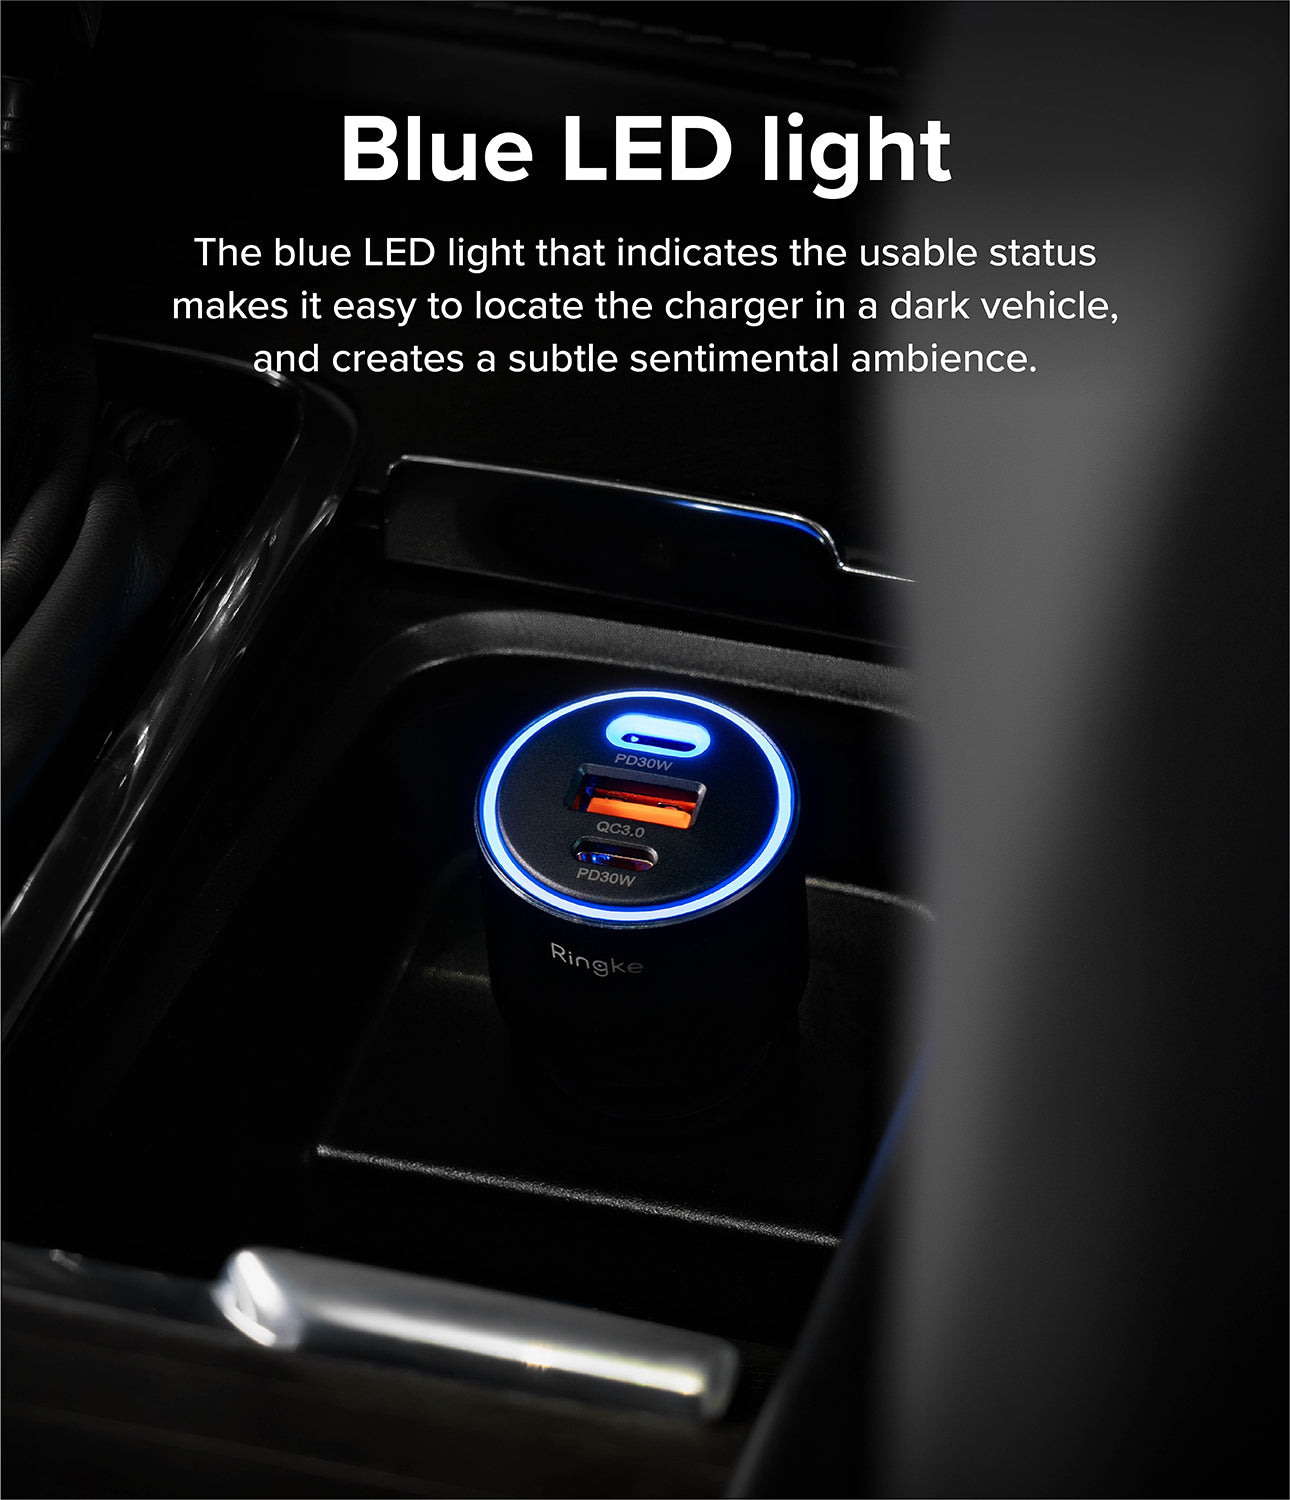 Ringke 3-Port Car Fast Charger - Blue LED Light. The blue LED light that indicates the usable status makes it easy to locate the charger in a dark vehicle. and creates and subtle sentimental ambience.